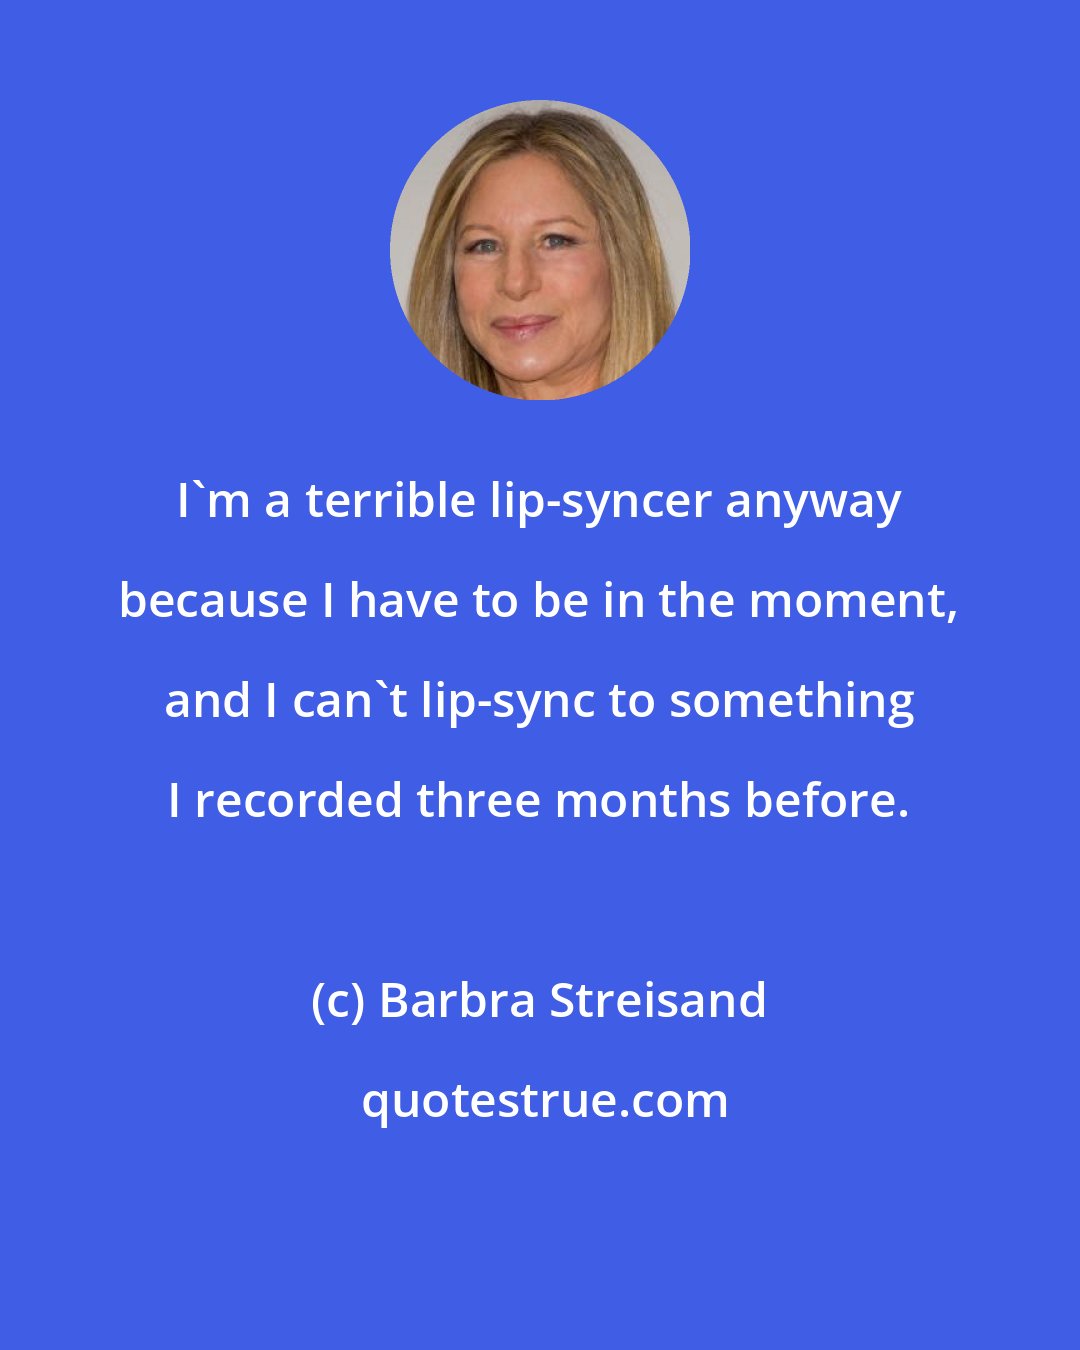 Barbra Streisand: I'm a terrible lip-syncer anyway because I have to be in the moment, and I can't lip-sync to something I recorded three months before.